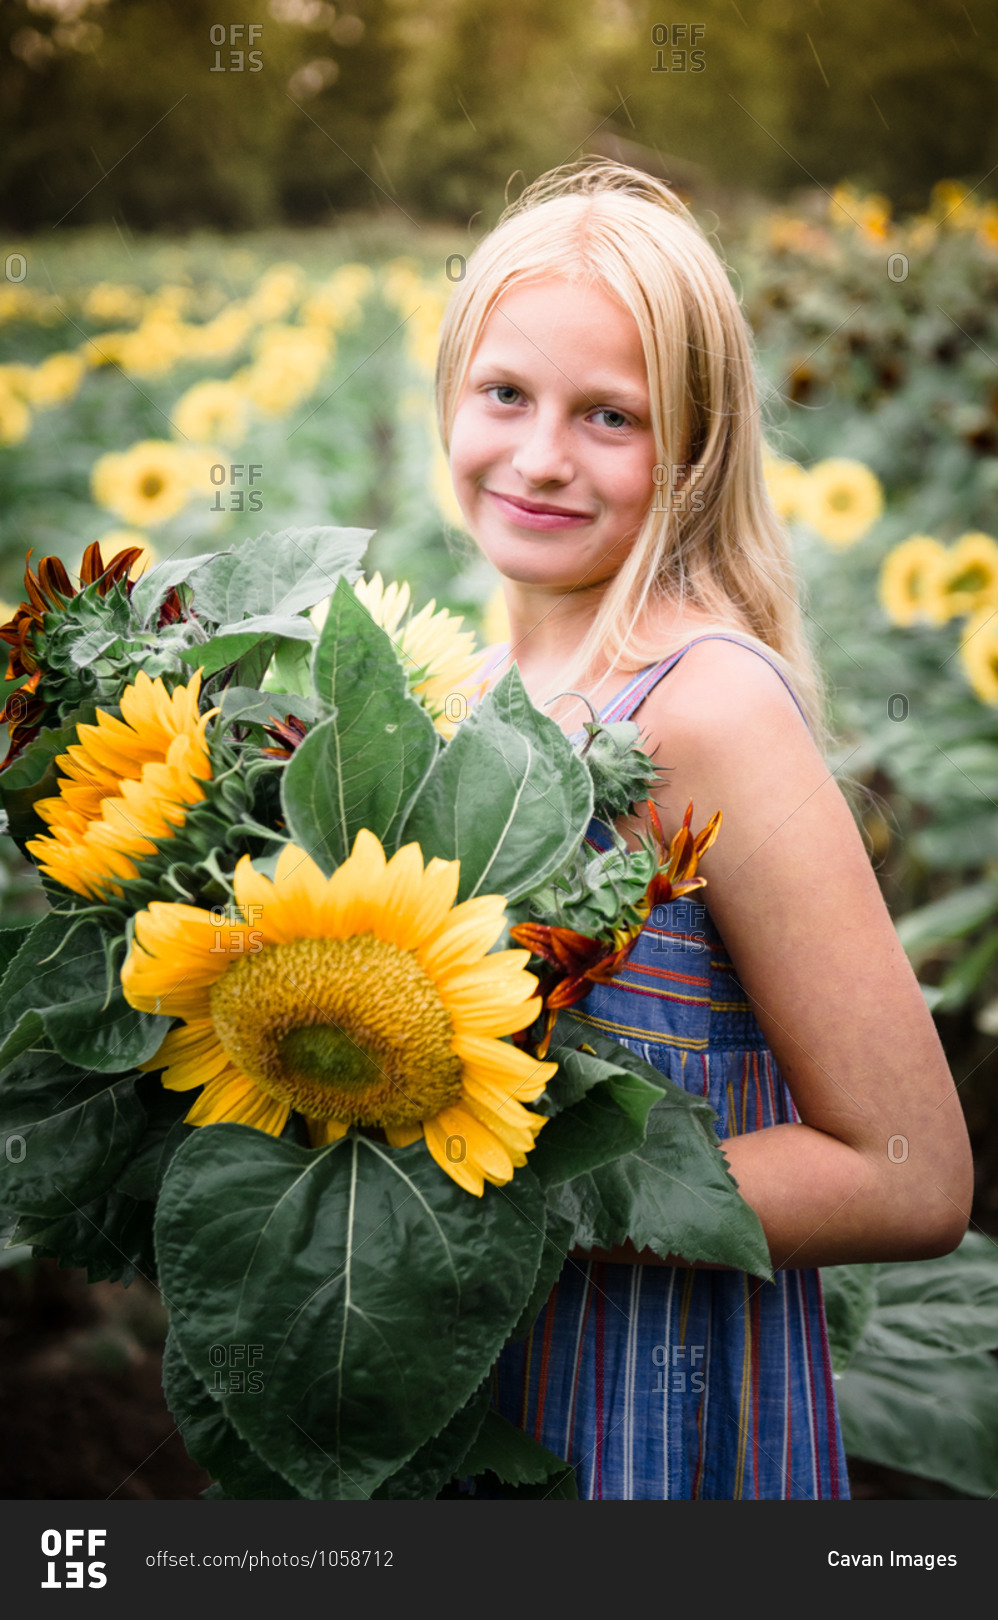 Young Girl Holding Red and Yellow Sunflowers in a Sunflower Field